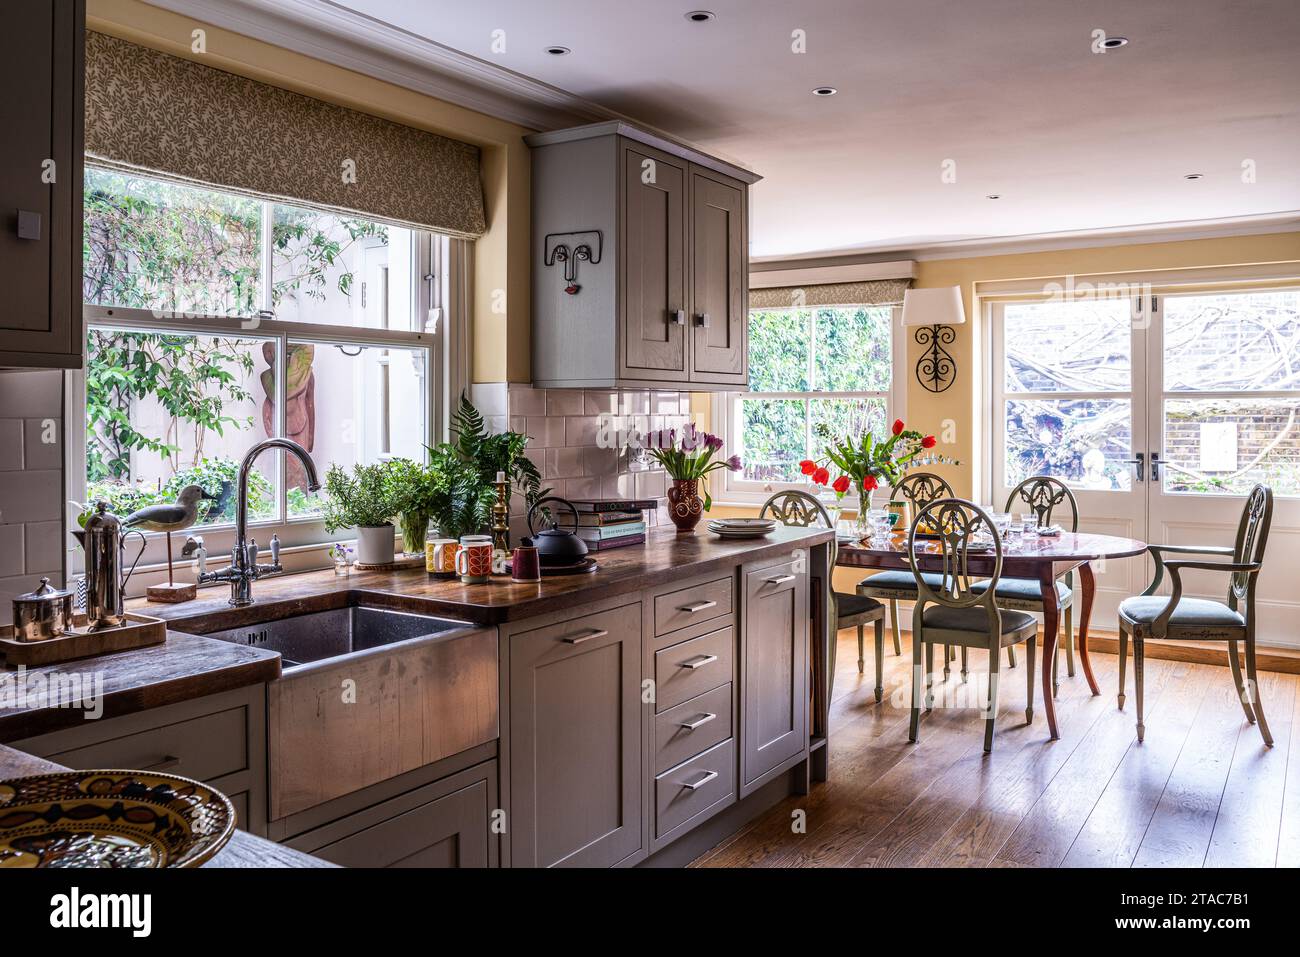 Butler sink in renovated kitchen-diner of late 19th century West London home. Stock Photo